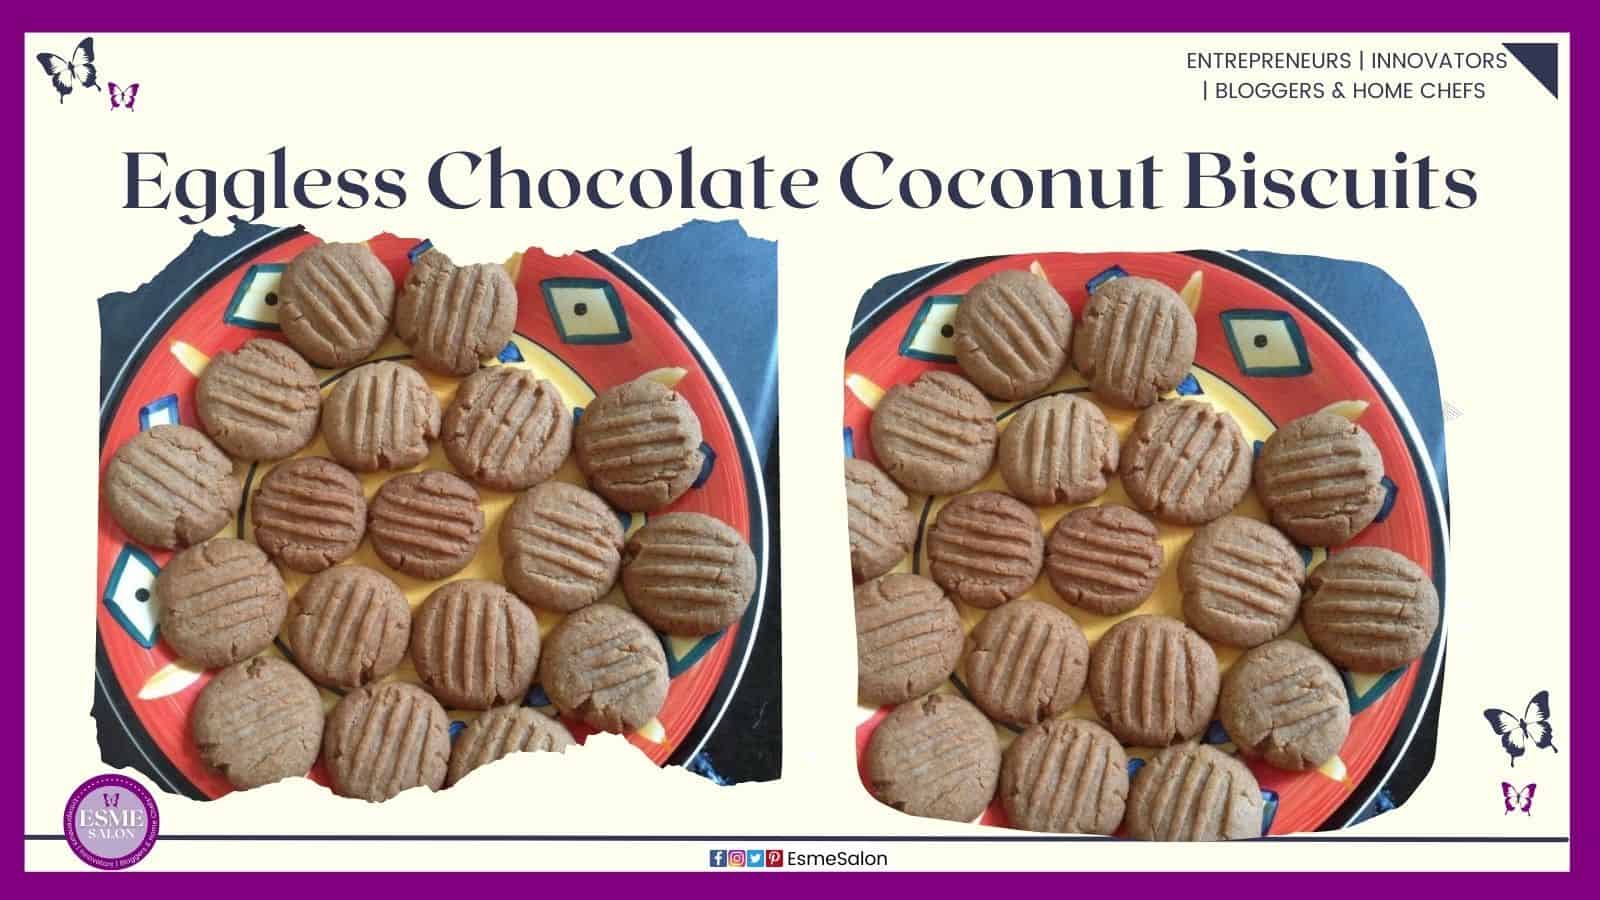 an image of Round and slightly flattened Eggless Chocolate Coconut Biscuits